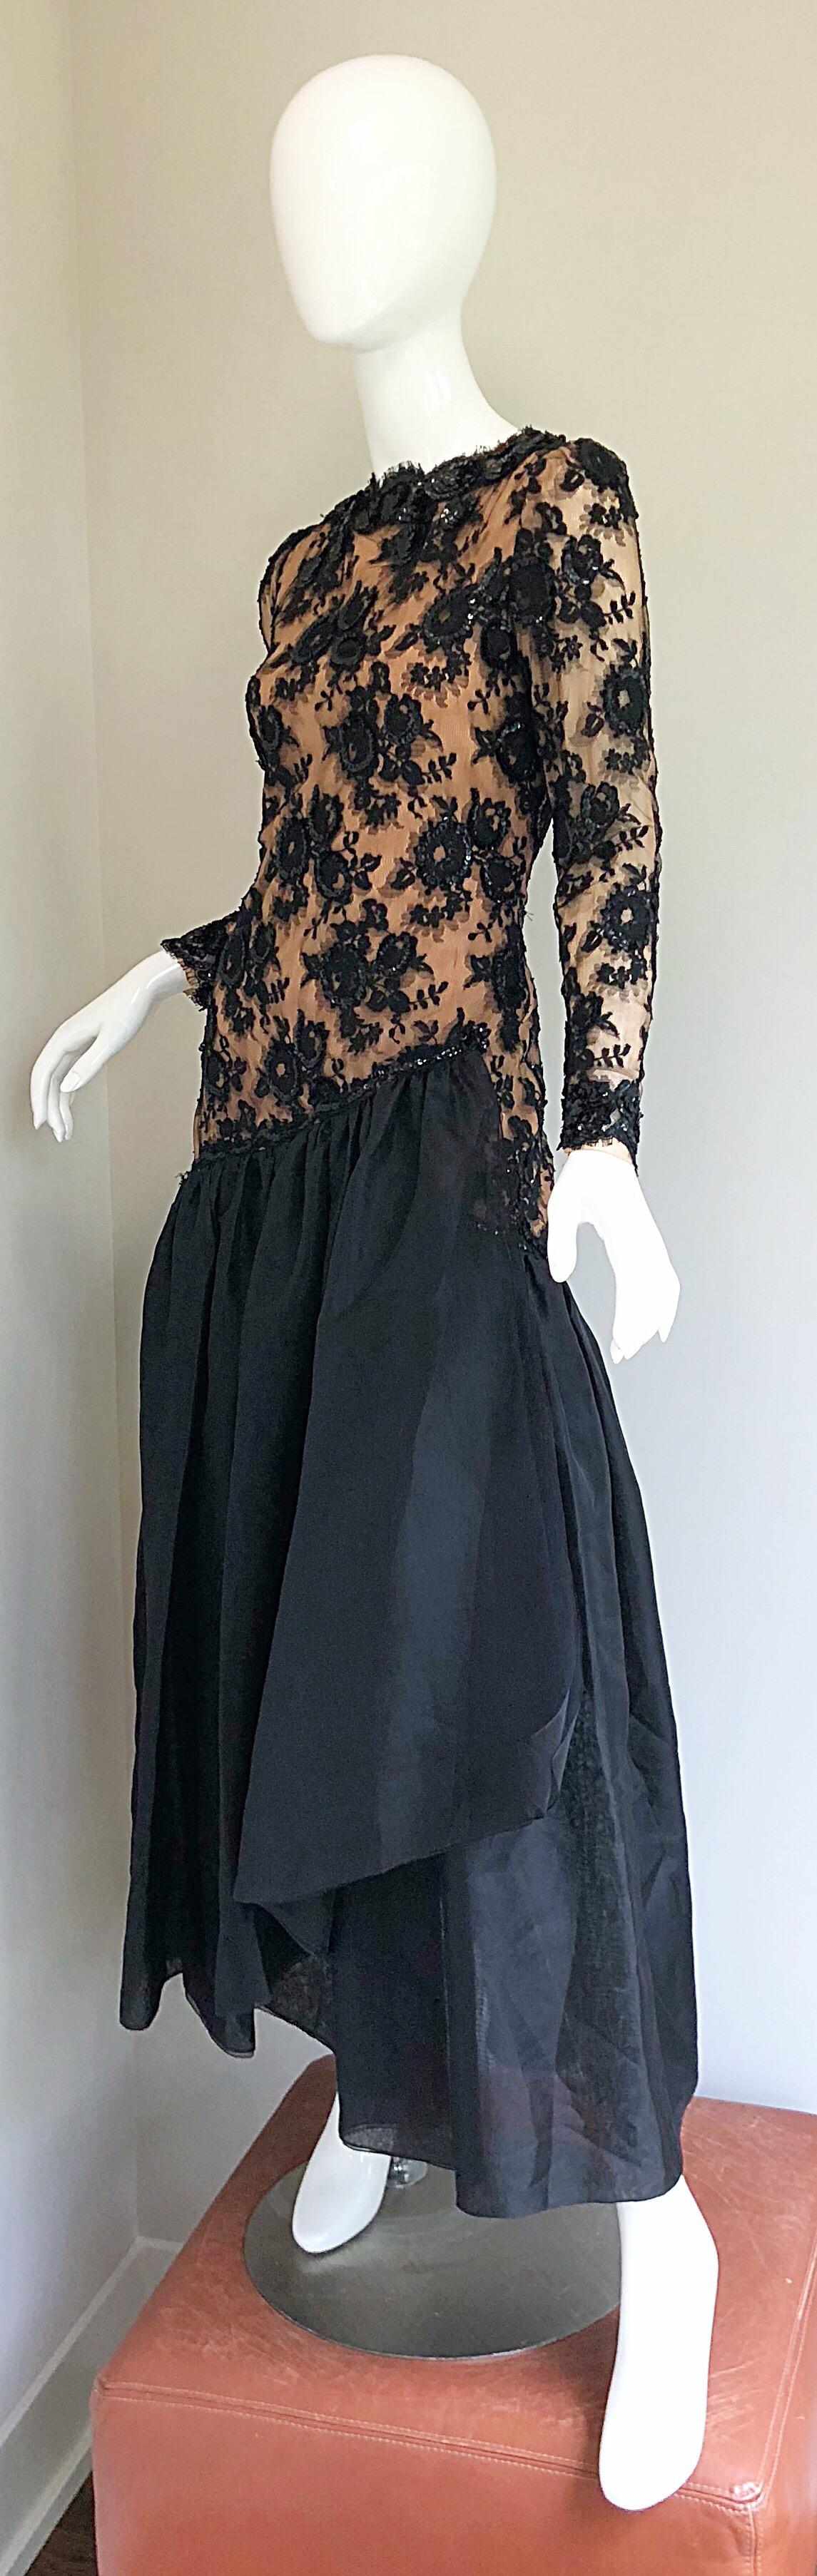 Vintage Bill Blass Black Nude 90s Size 6 / 8 Sequined Chiffon Evening Gown Dress In Excellent Condition For Sale In San Diego, CA